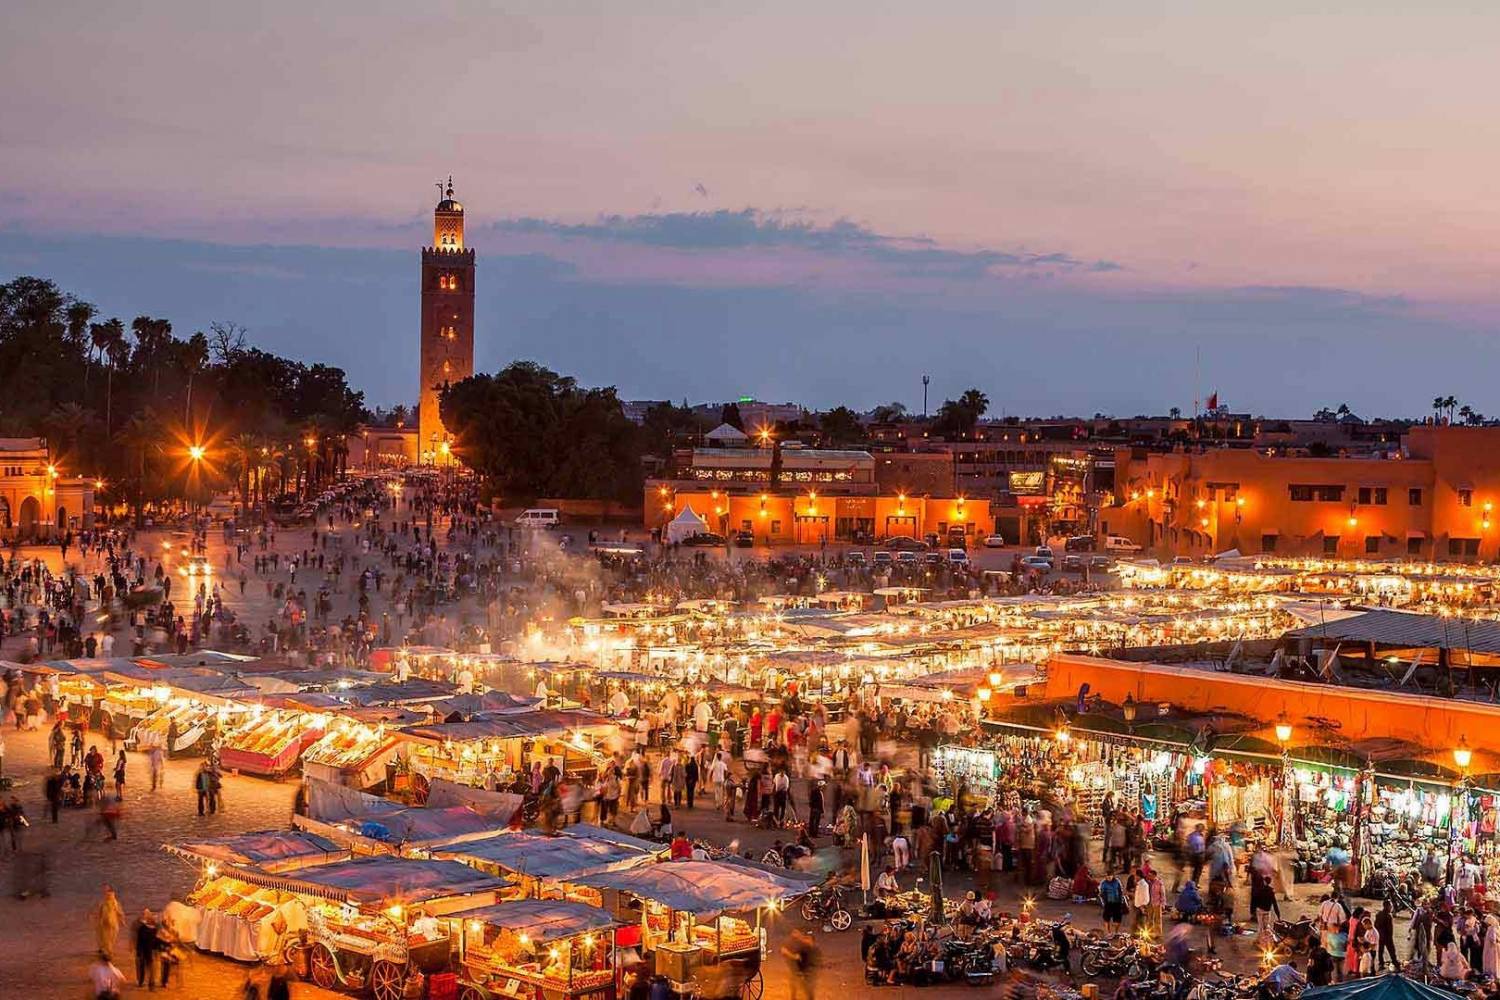 Book a Personal Chef in Marrakech for your holidays